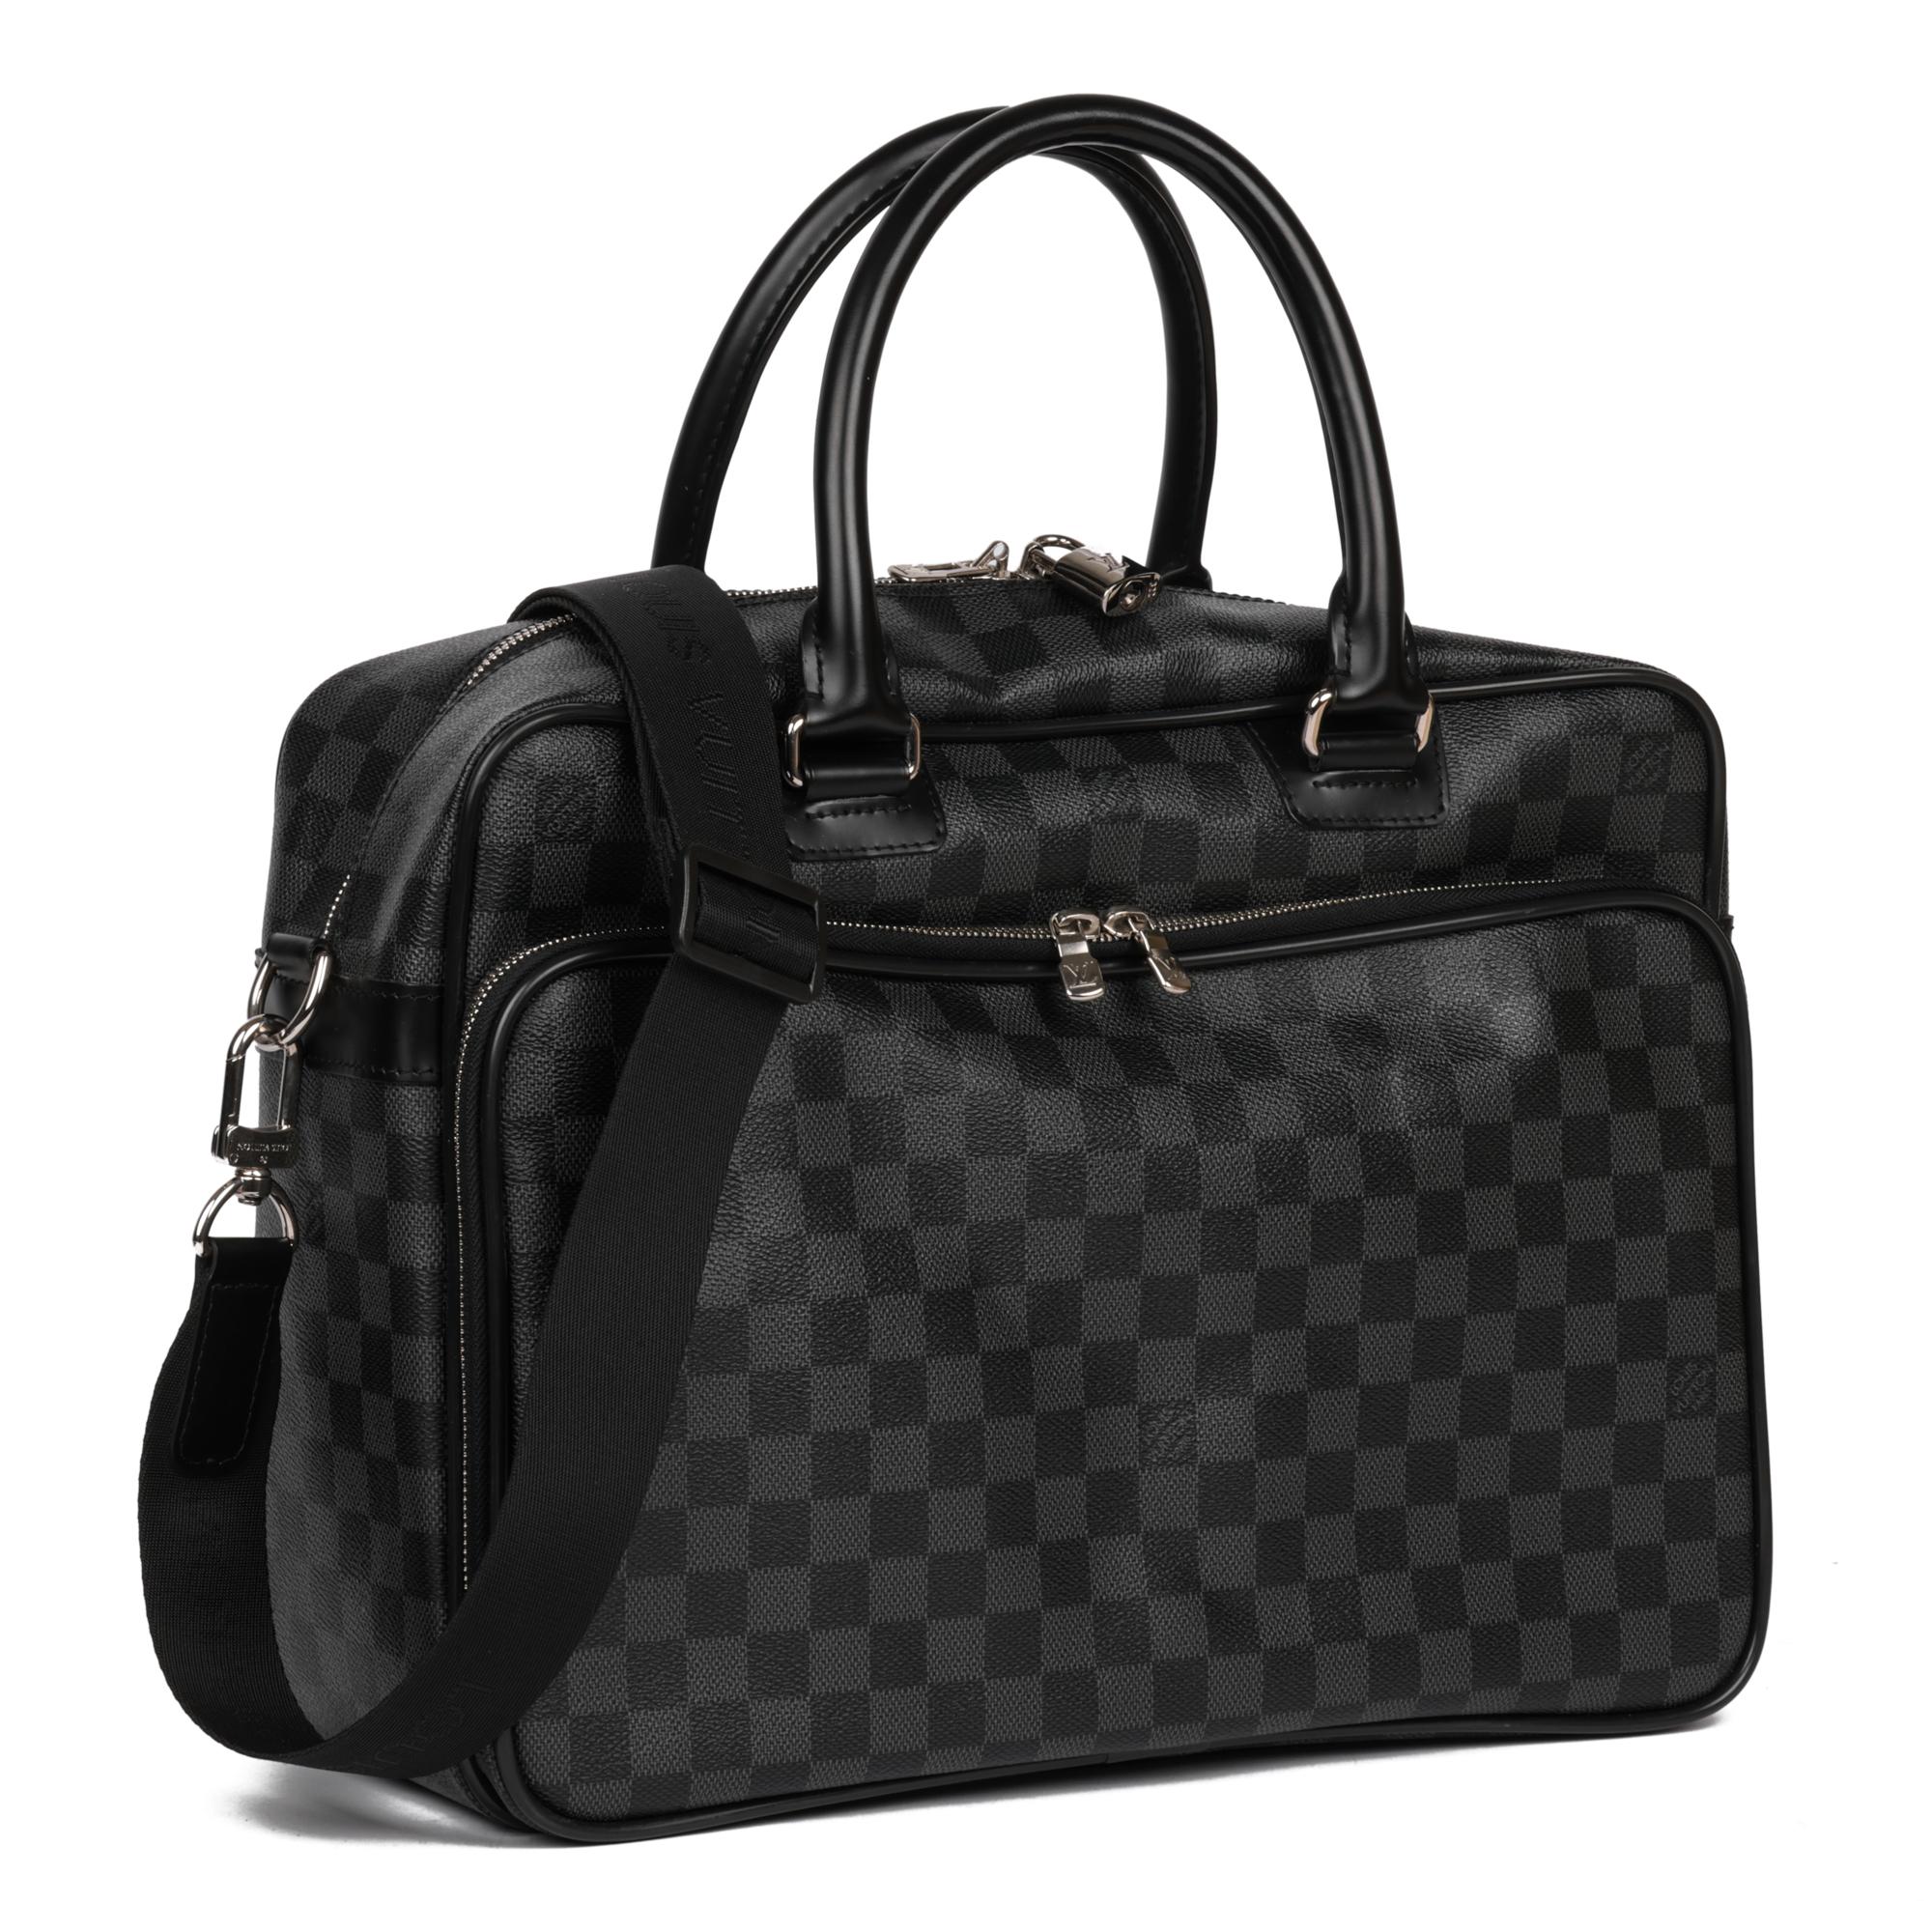 LOUIS VUITTON
Damier Graphite Coated Canvas & Black Calfskin Leather Icare Briefcase

Xupes Reference: HB5038
Serial Number: FL4101
Age (Circa): 2011
Accompanied By: Louis Vuitton Dust Bag, Strap 
Authenticity Details: Date Stamp (Made in